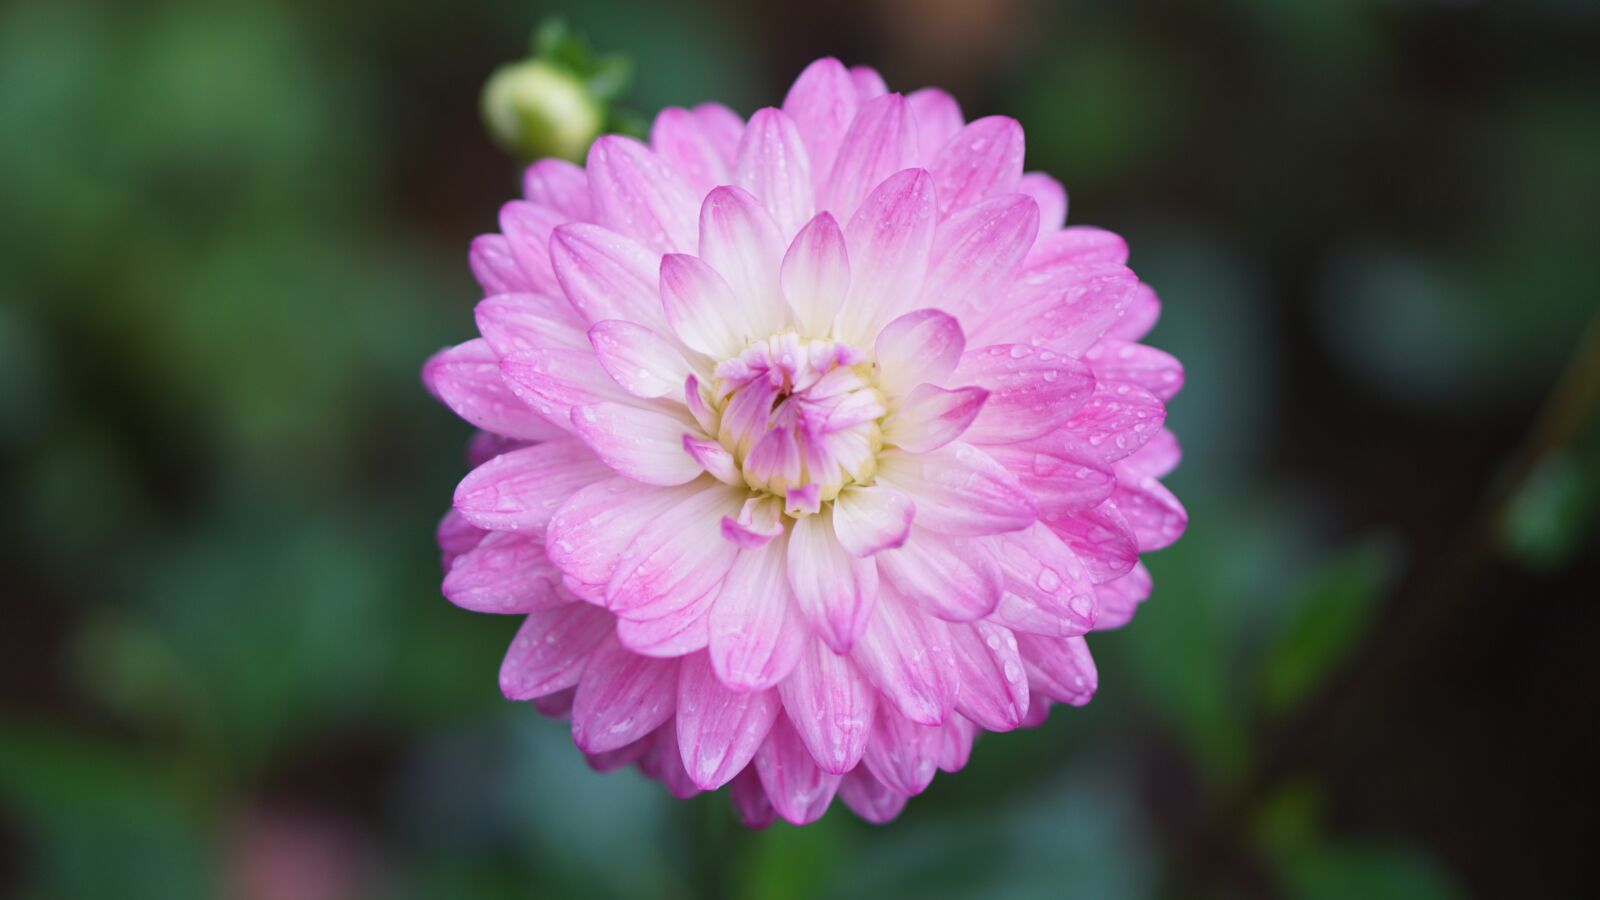 Sony a5100 sample photo. Flower, floral, pink photography